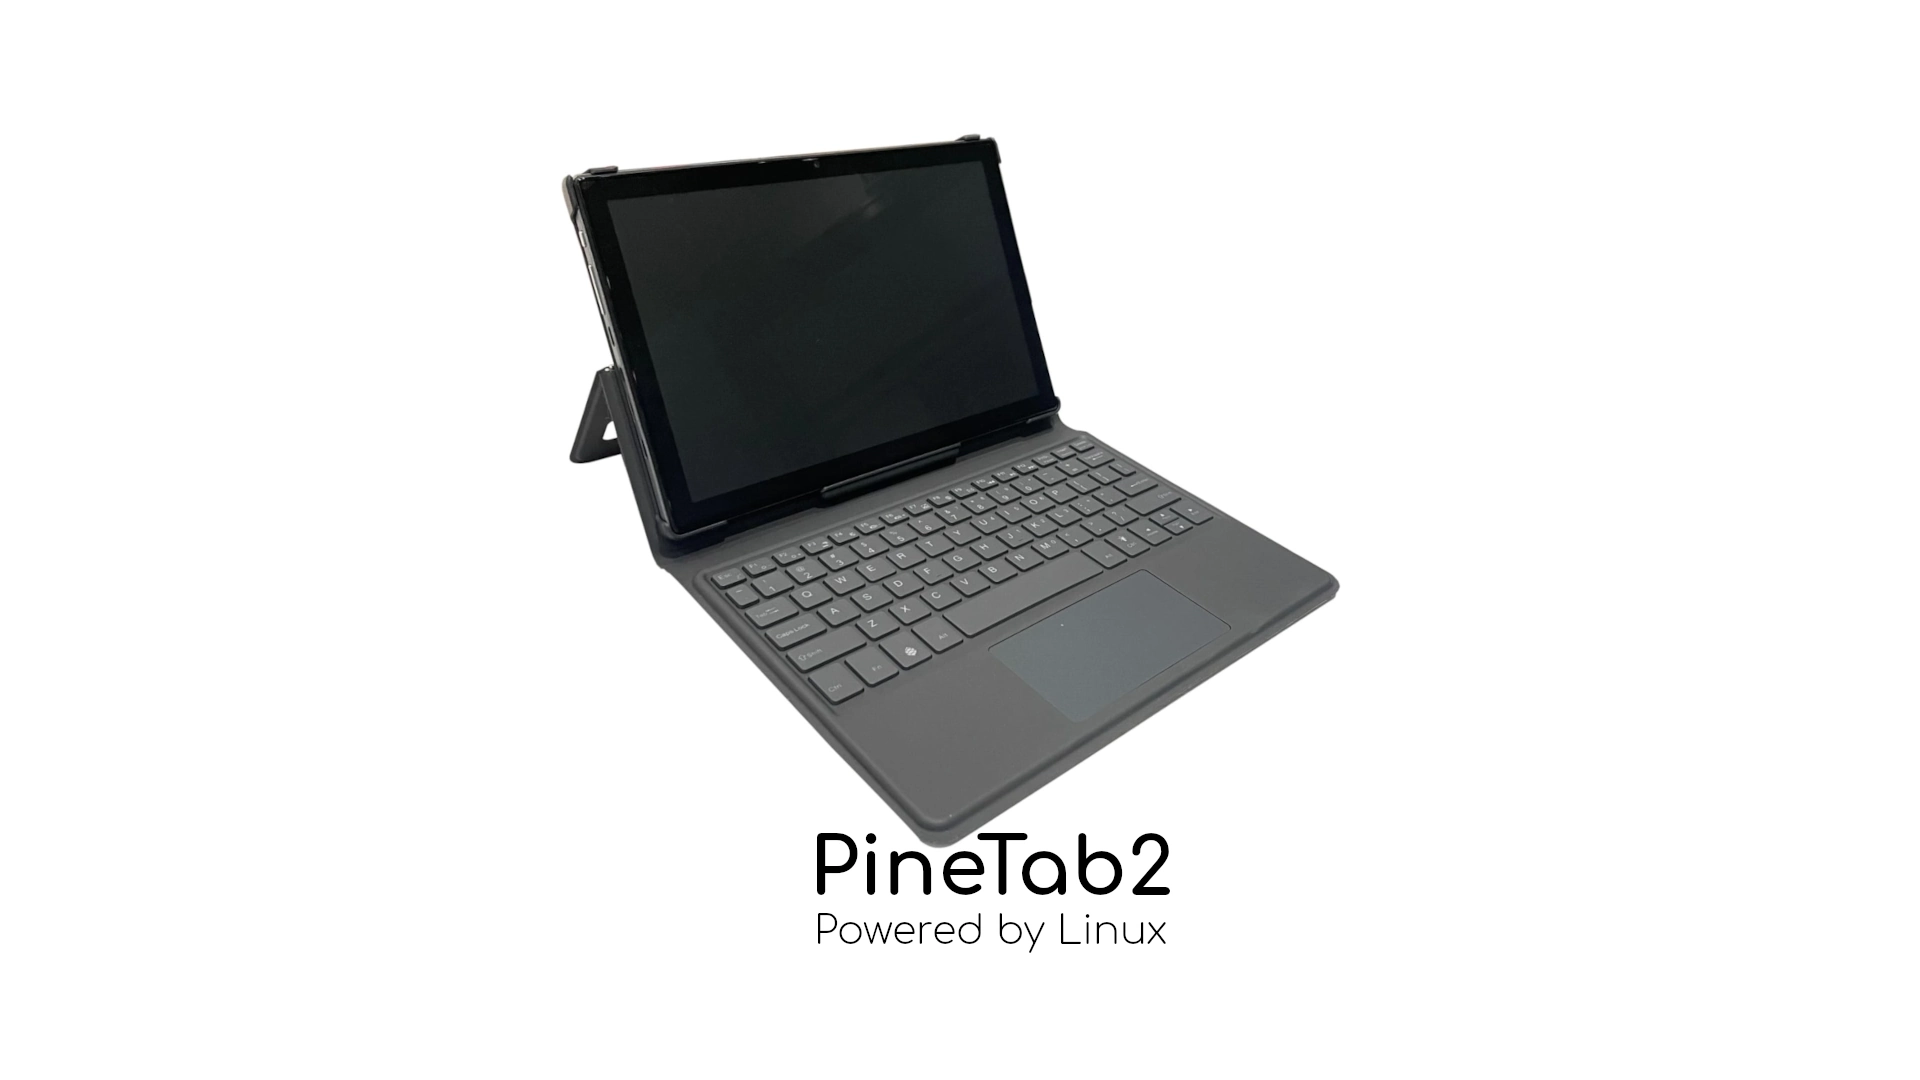 PINE64 Announces the PineTab2 Linux Tablet with Up to 8GB RAM and RK3566 SoC